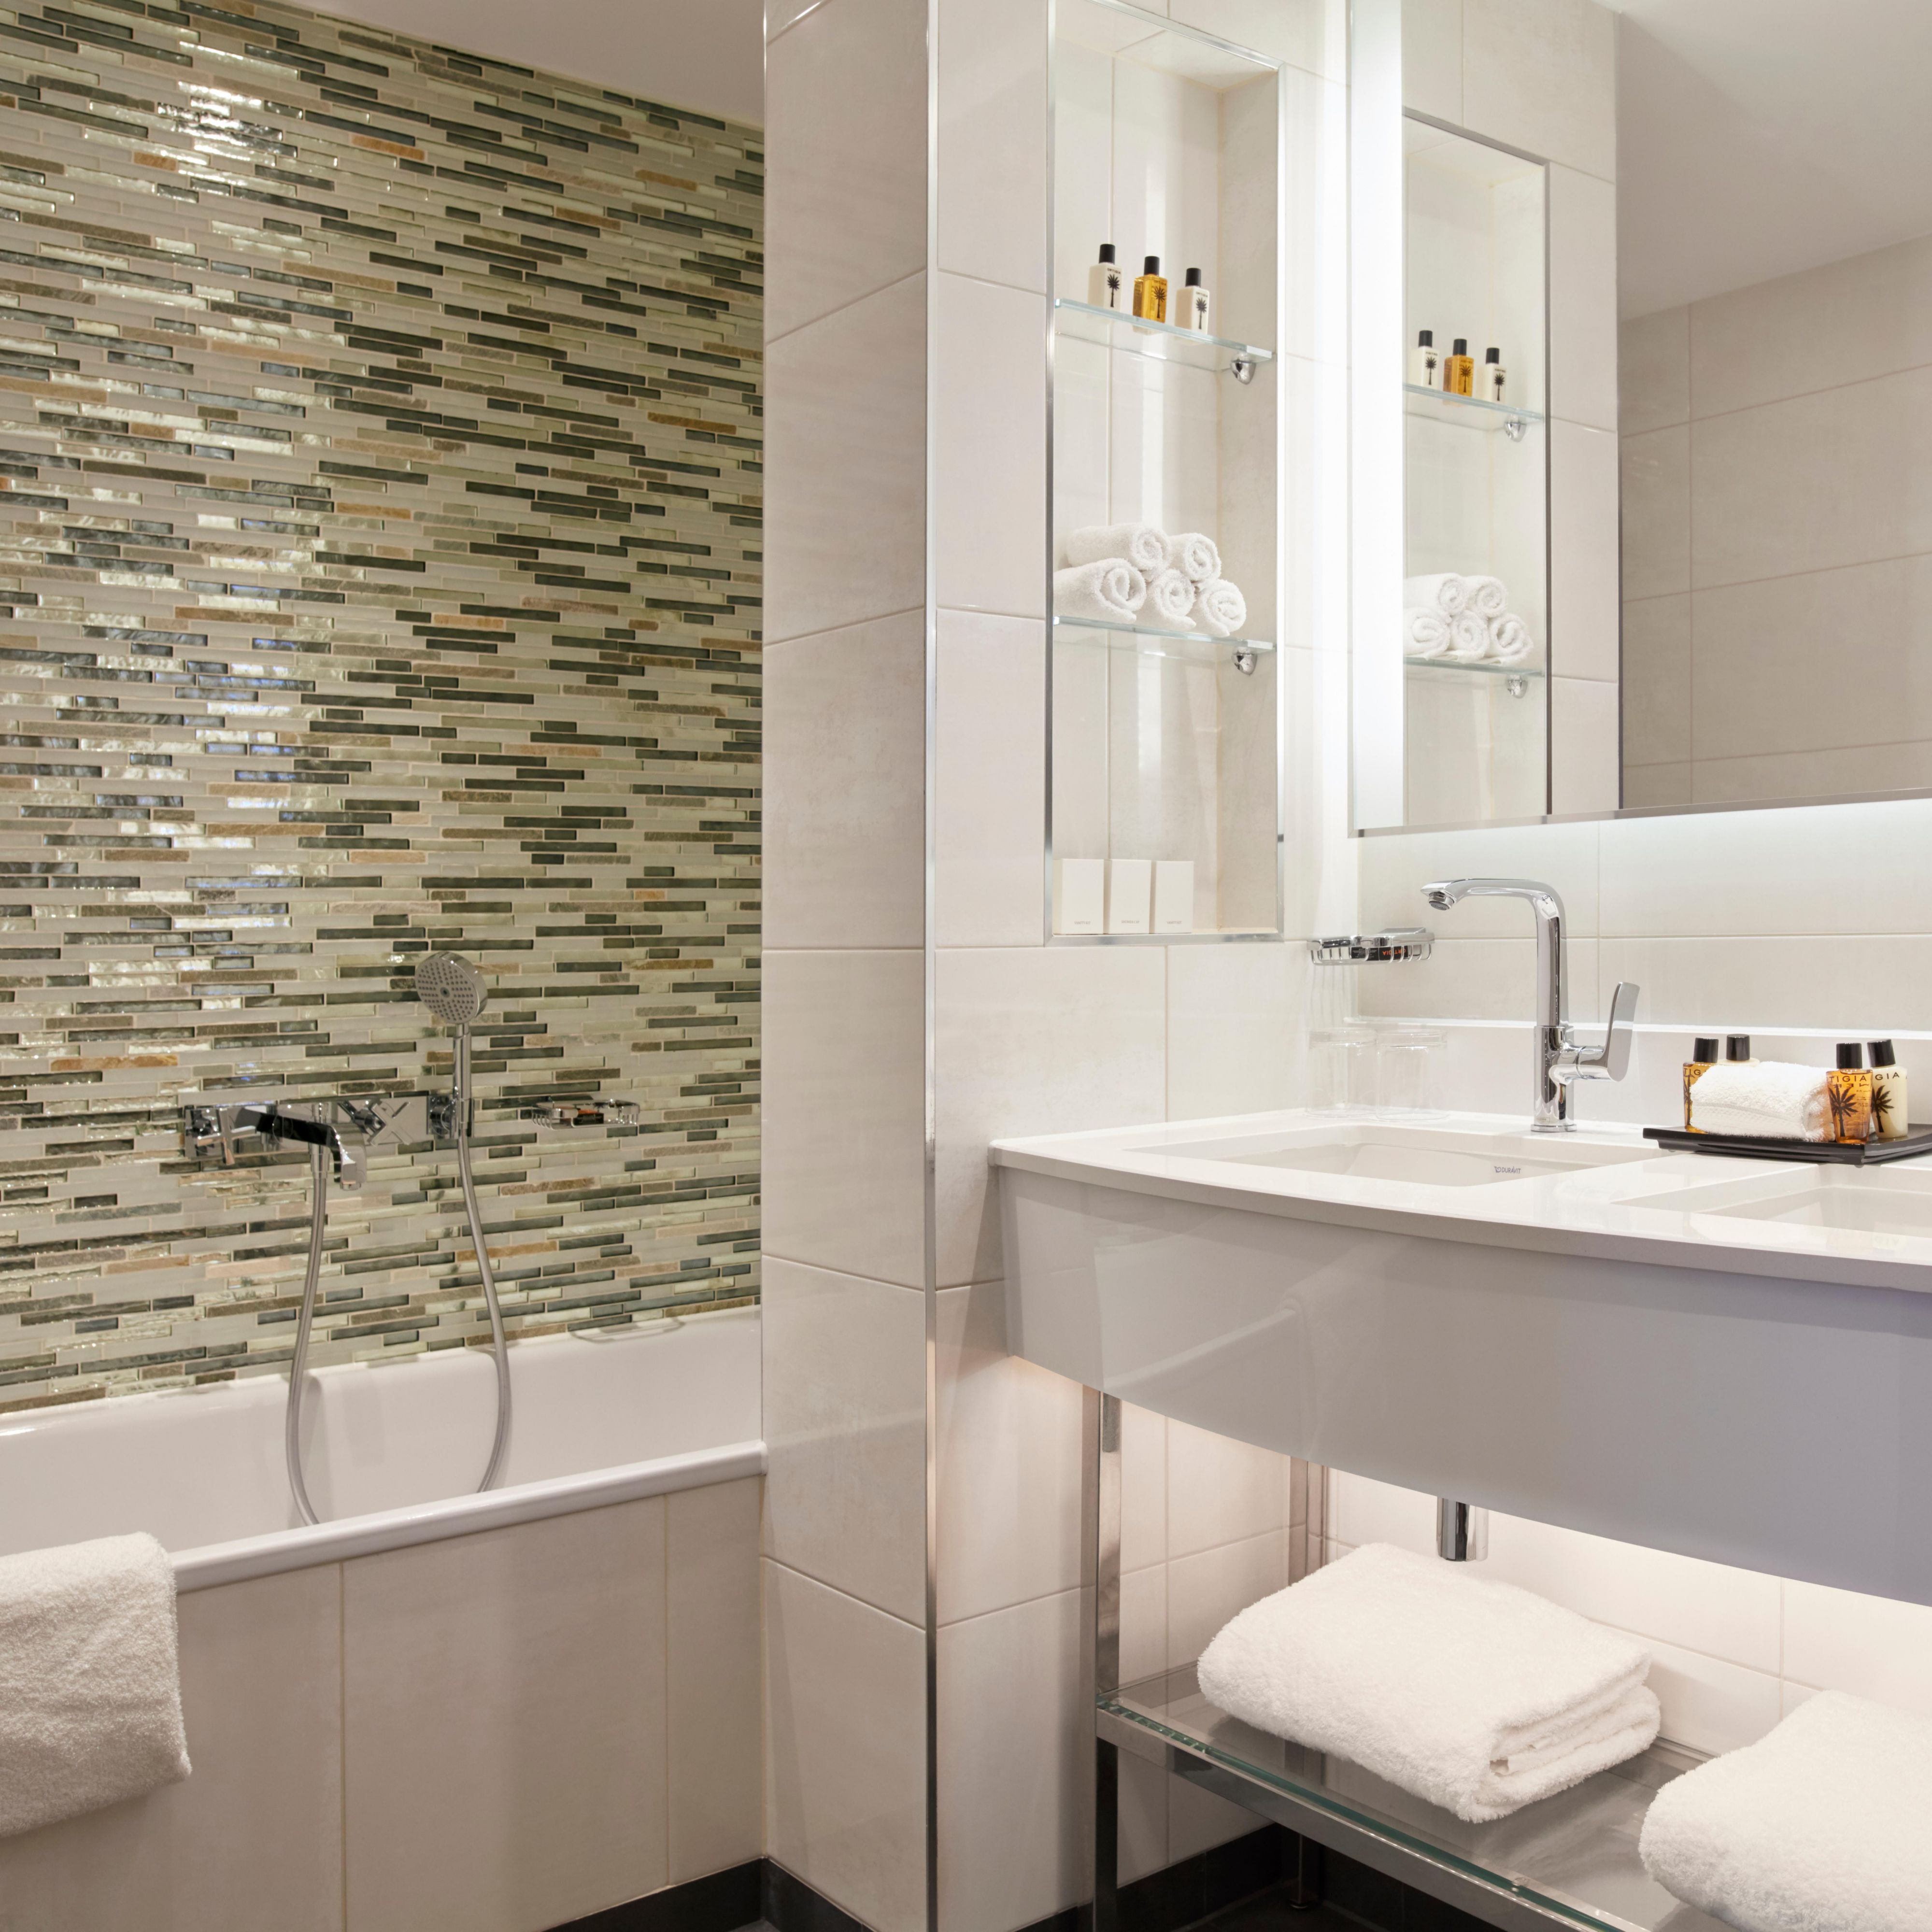 Our suite bathrooms offer luxury with a stunning design